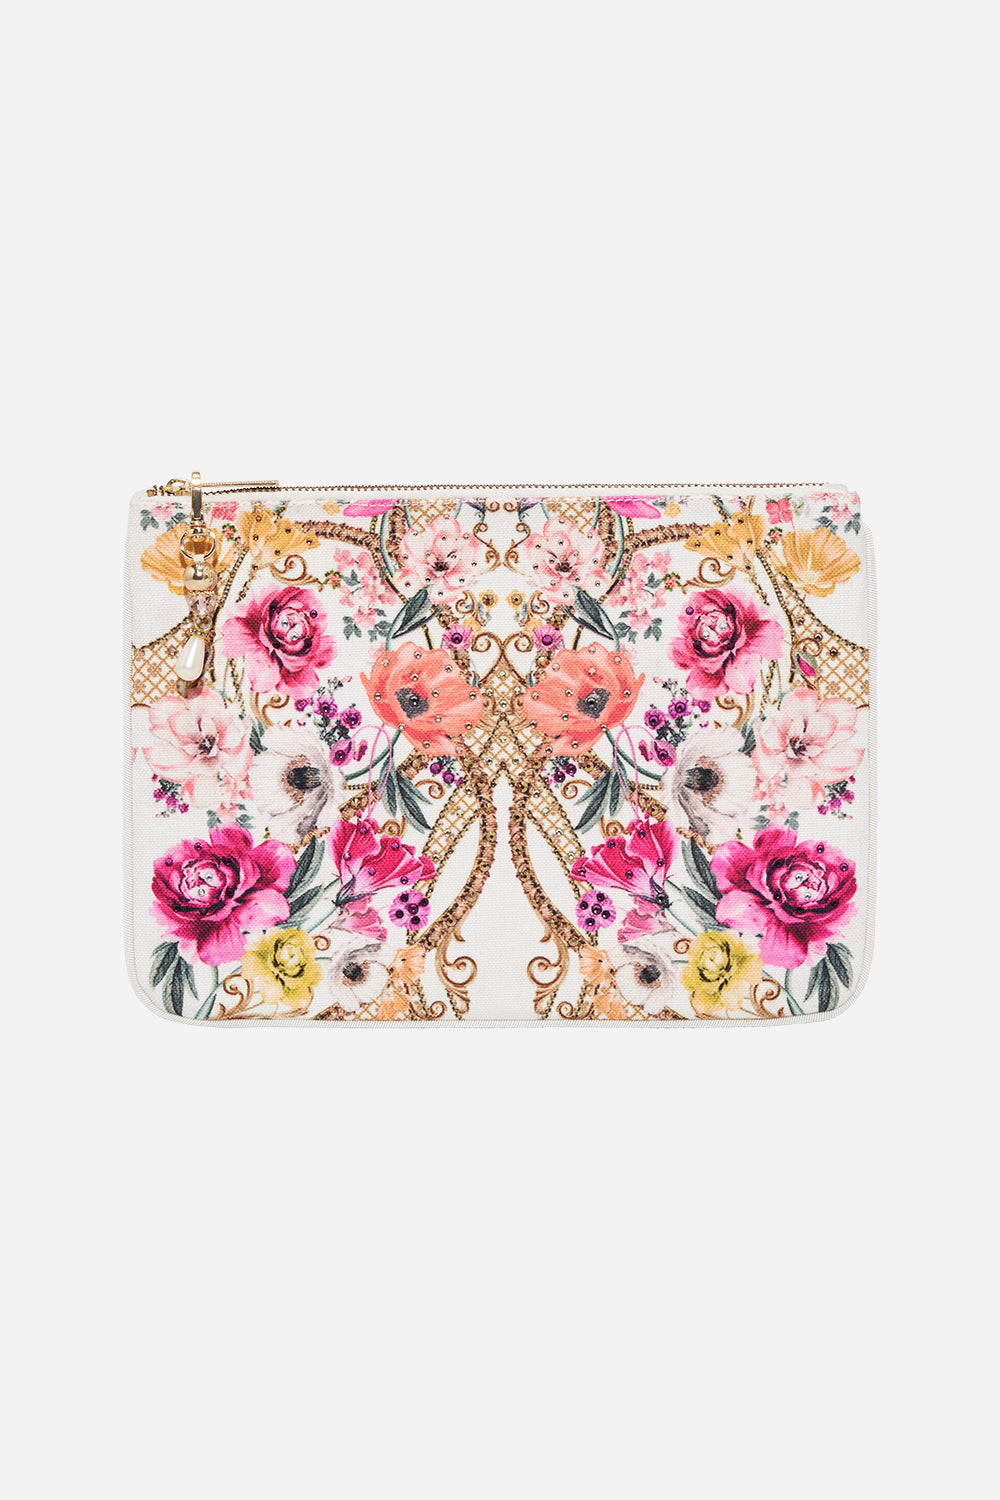 Product view of CAMILLA floral print clutch bag in Destiny Calling print 